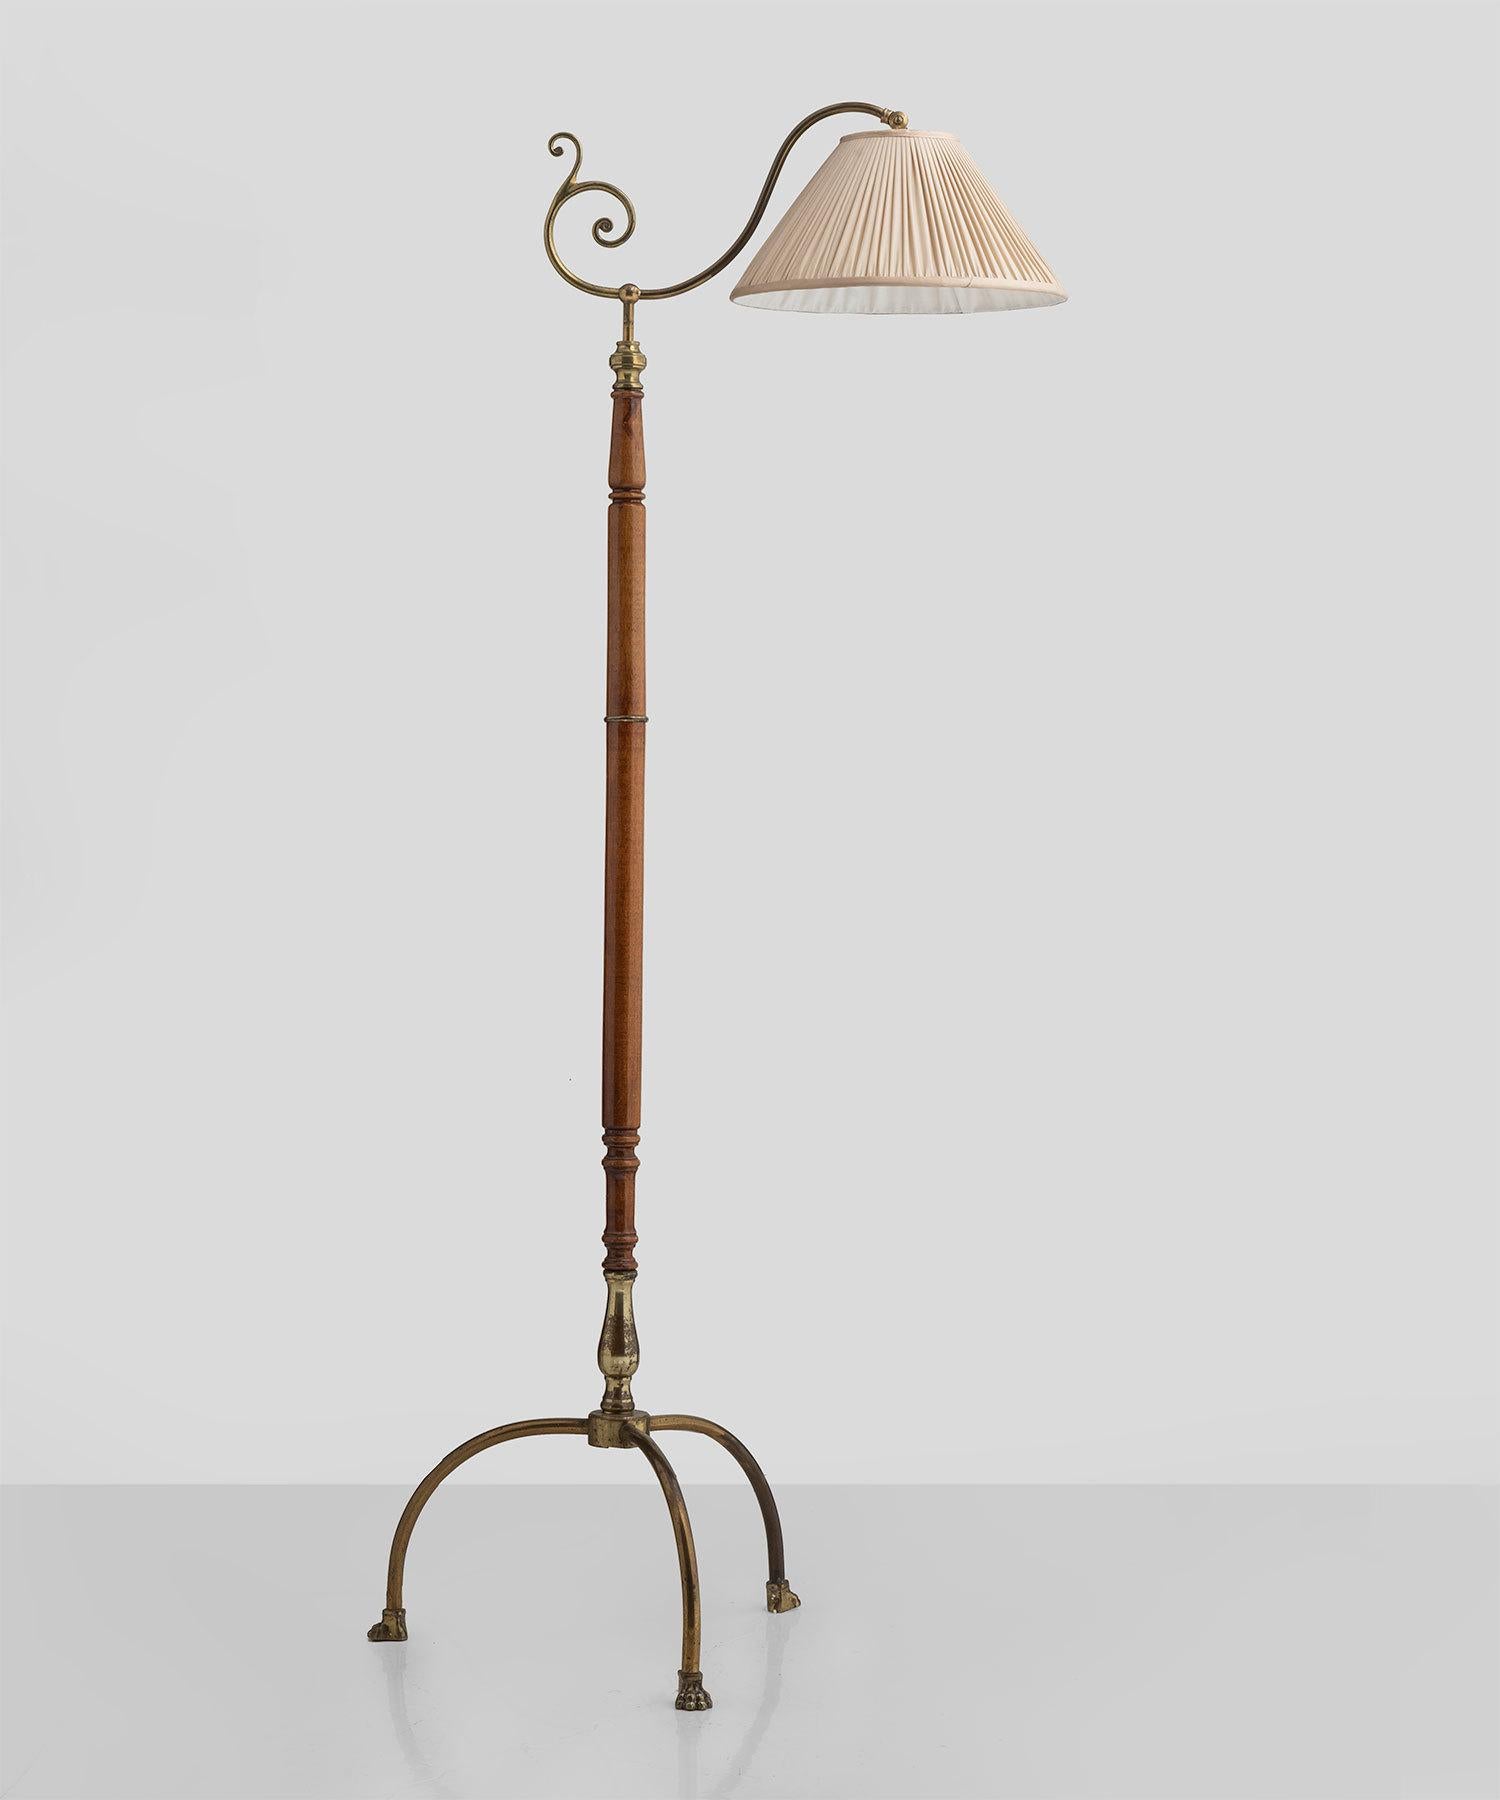 Adjustable reading lamp with claw feet, France, circa 1930

Polished wood stem and brass swan neck, standing on three, splayed claw feet.

Measure: 54